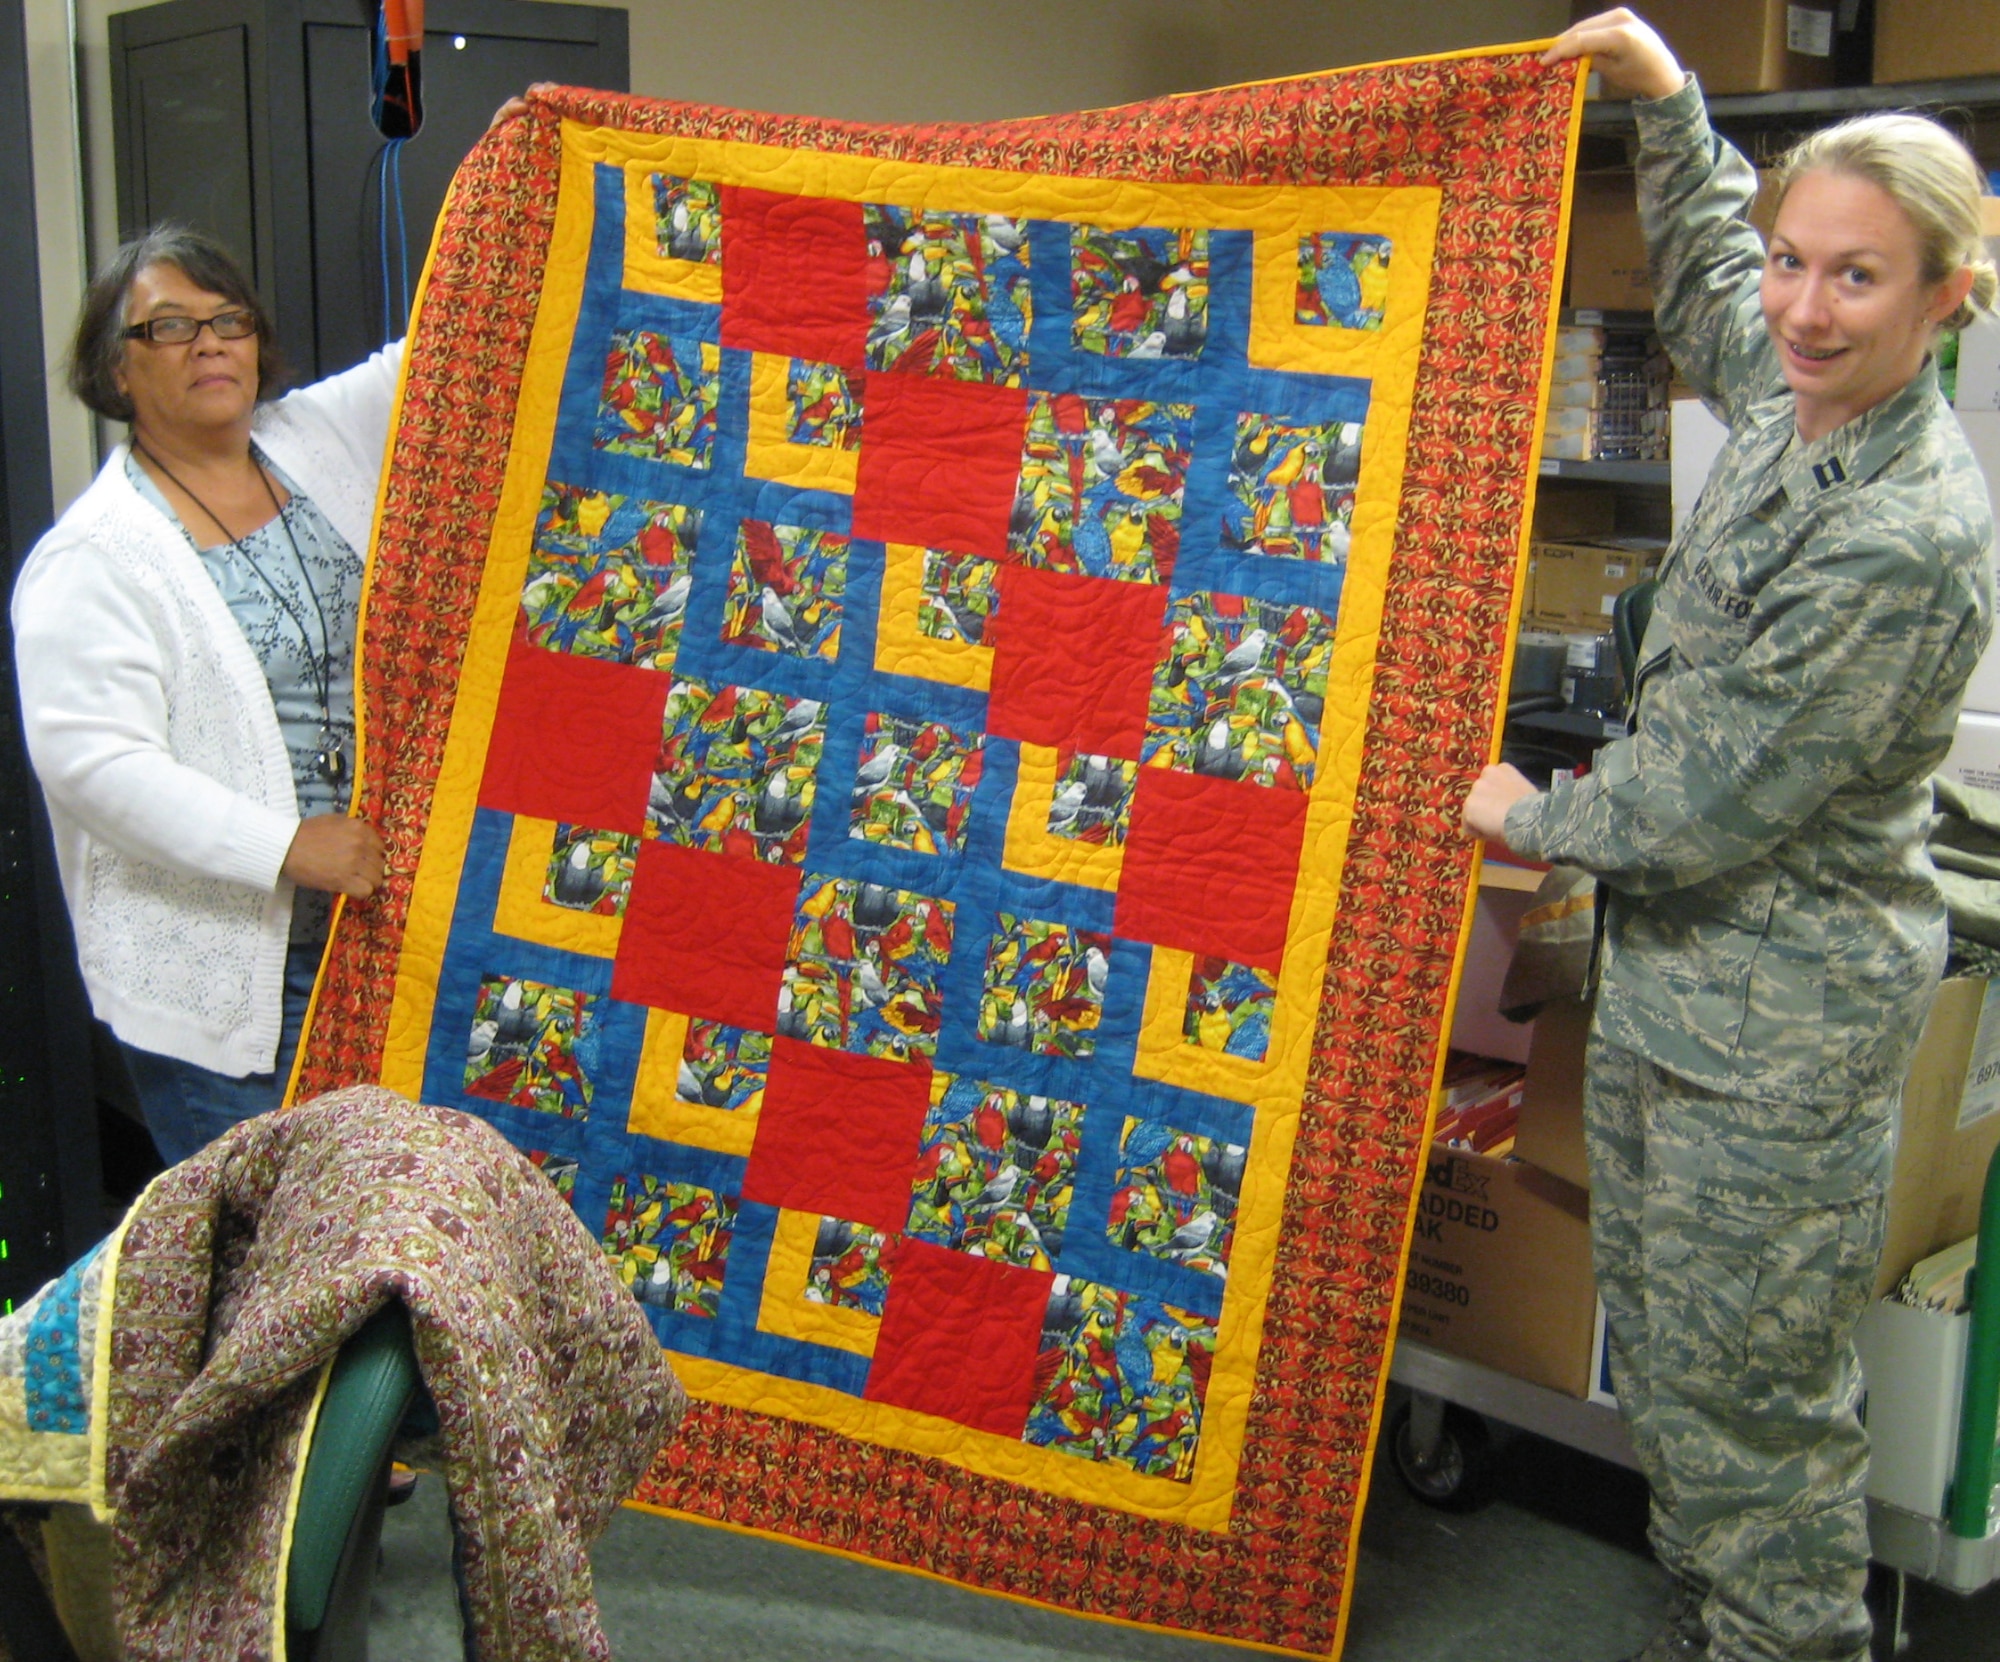 Angie Carr and Capt. Sandra Bannan display a Quilt of Valor June 12, 2009 at the Air Force Mortuary Affairs Operations Center located at Dover A.F.B., Delaware. Quilts of Valor have been awarded to several hundred workers at the center since late 2006. (U.S. Air Force photo/Tech. Sgt. Benjamin Matwey)